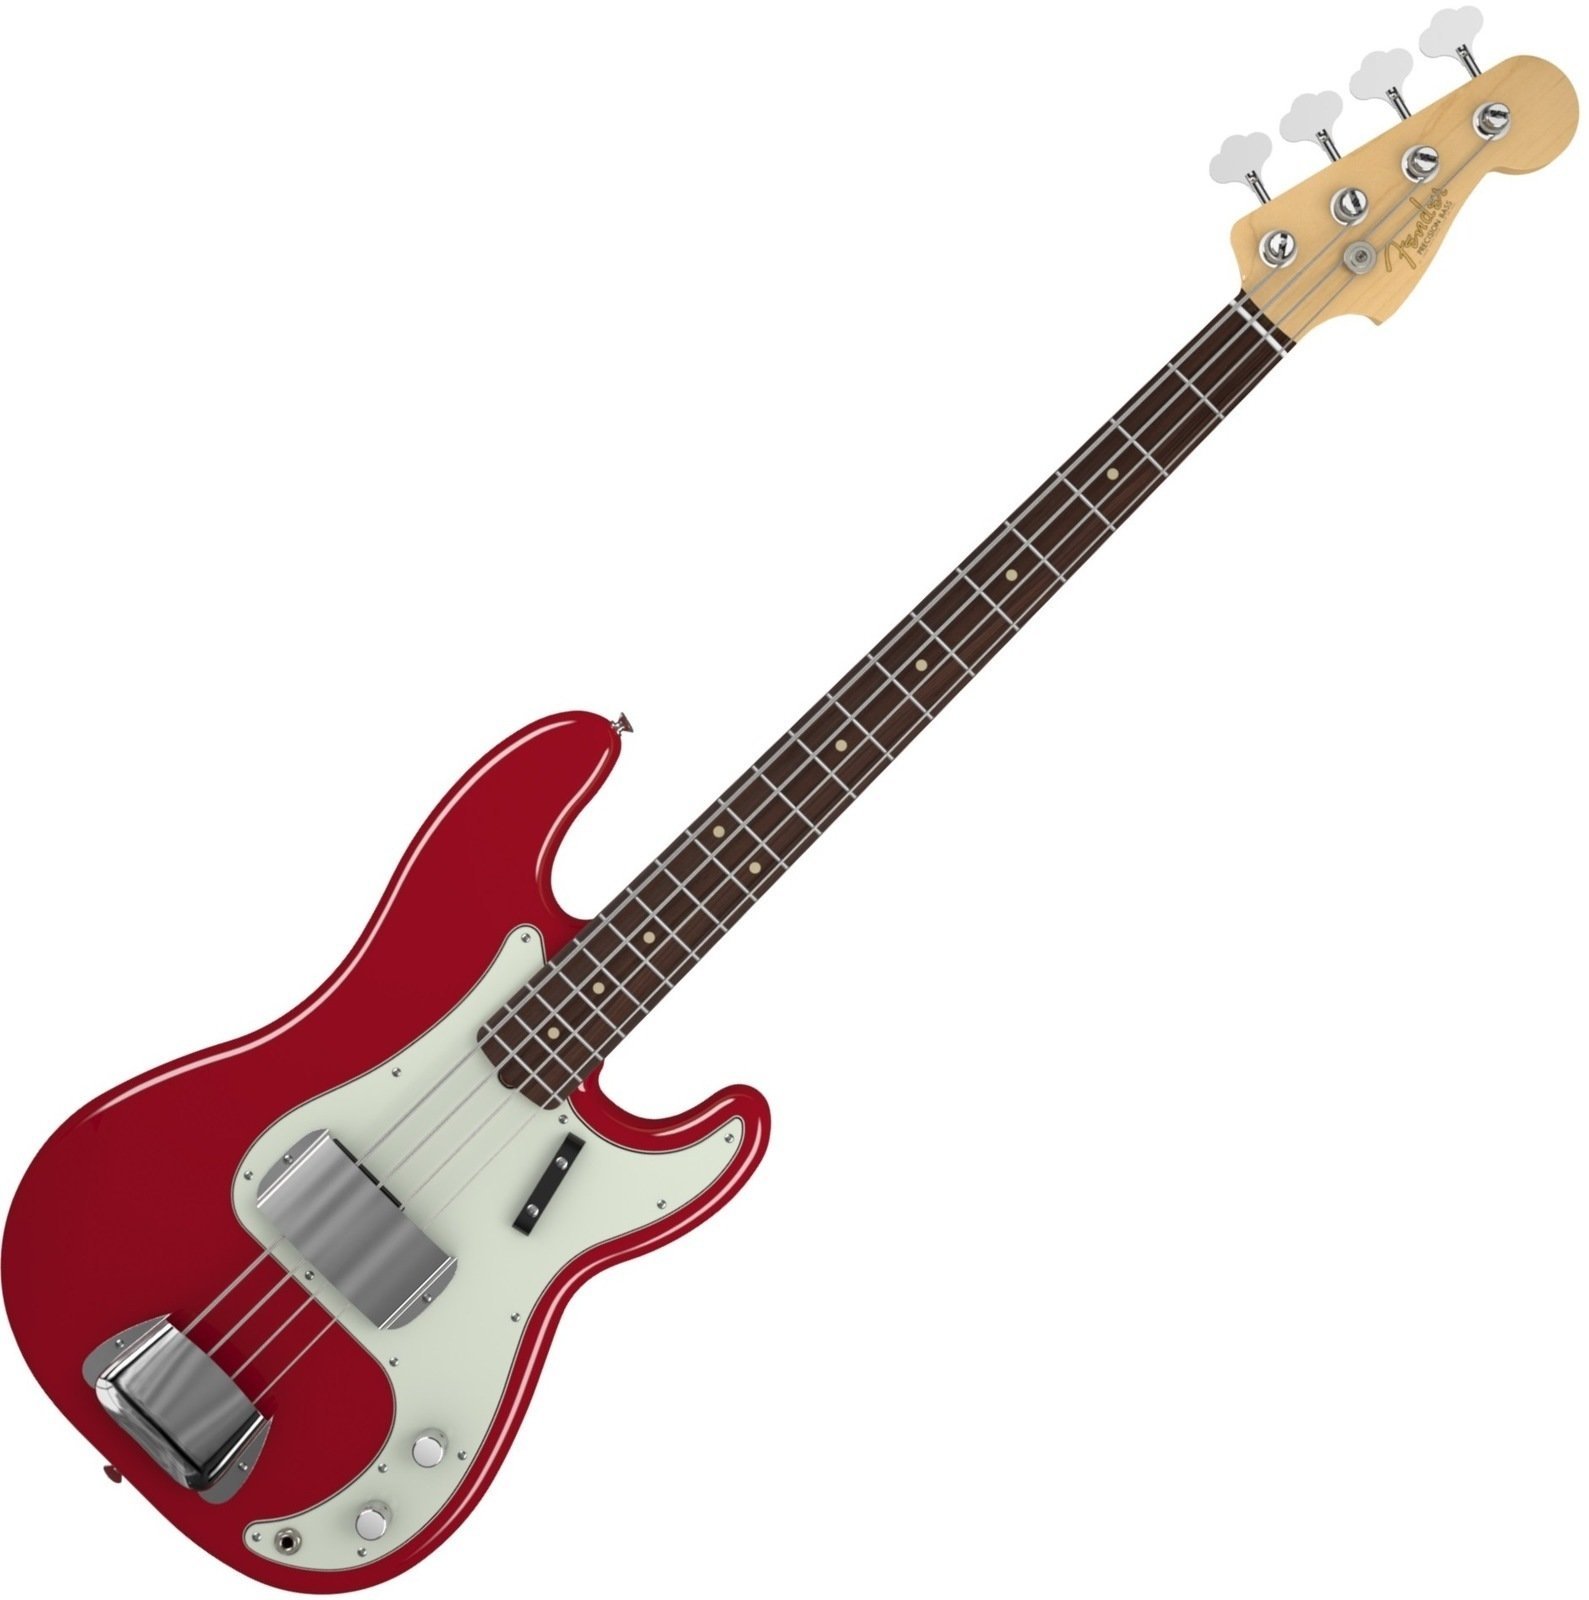 E-Bass Fender American Vintage '63 Precision Bass, Rosewood Fingerboard, Seminole Red